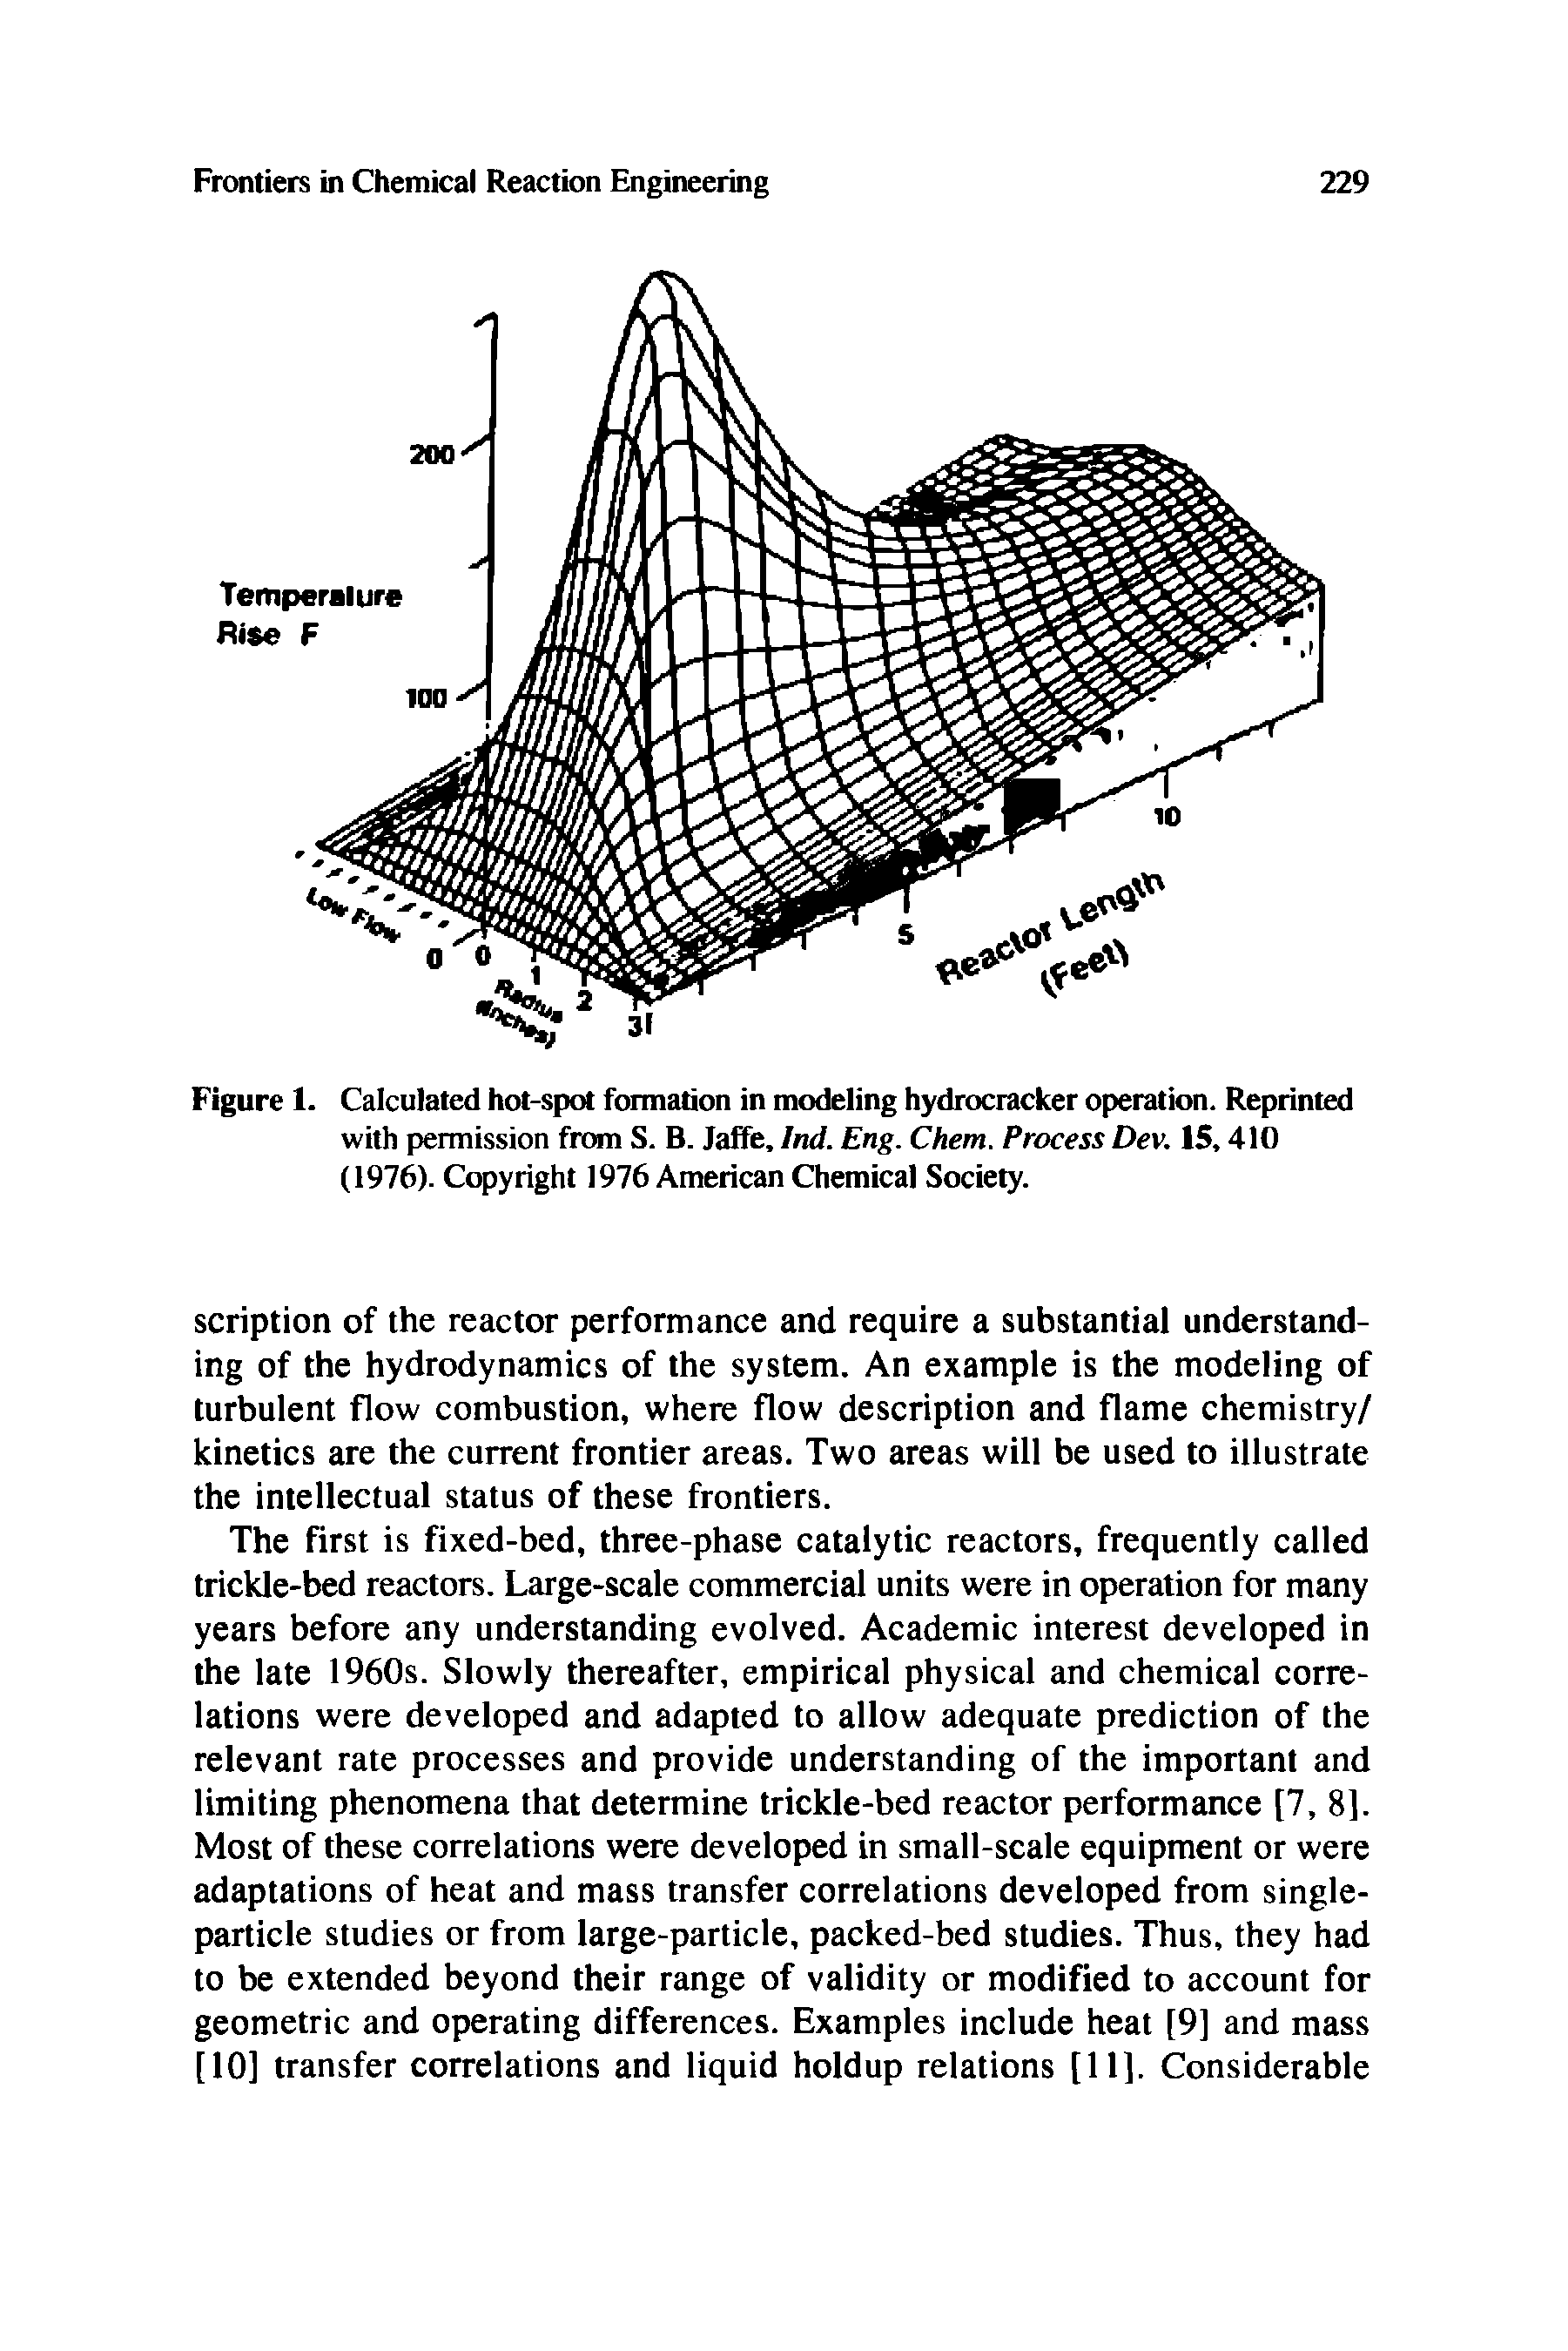 Figure 1. Calculated hot-spot formation in modeling hydrocracker operation. Reprinted with permission from S. B. Jaife, Ind. Eng. Chem. Process Dev. 15,410 (1976). Copyright 1976 American Chemical Society.